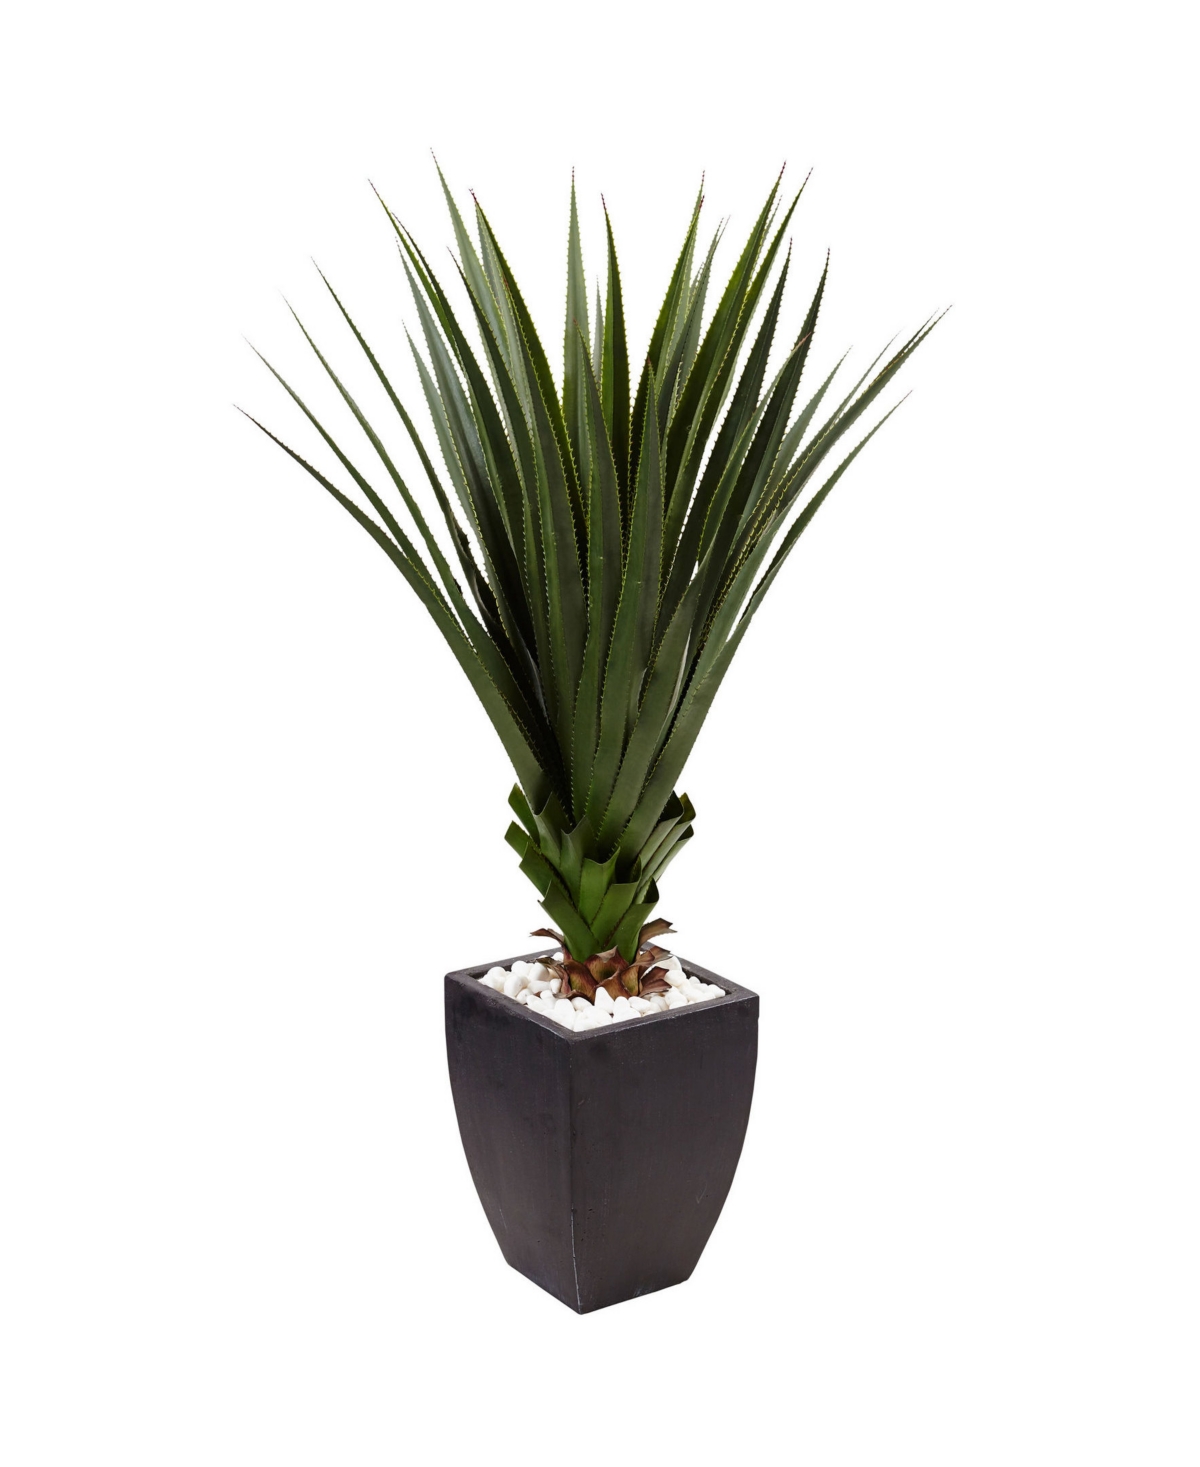 4.5' Spiked Agave Indoor/Outdoor Artificial Plant in Black Planter - Green